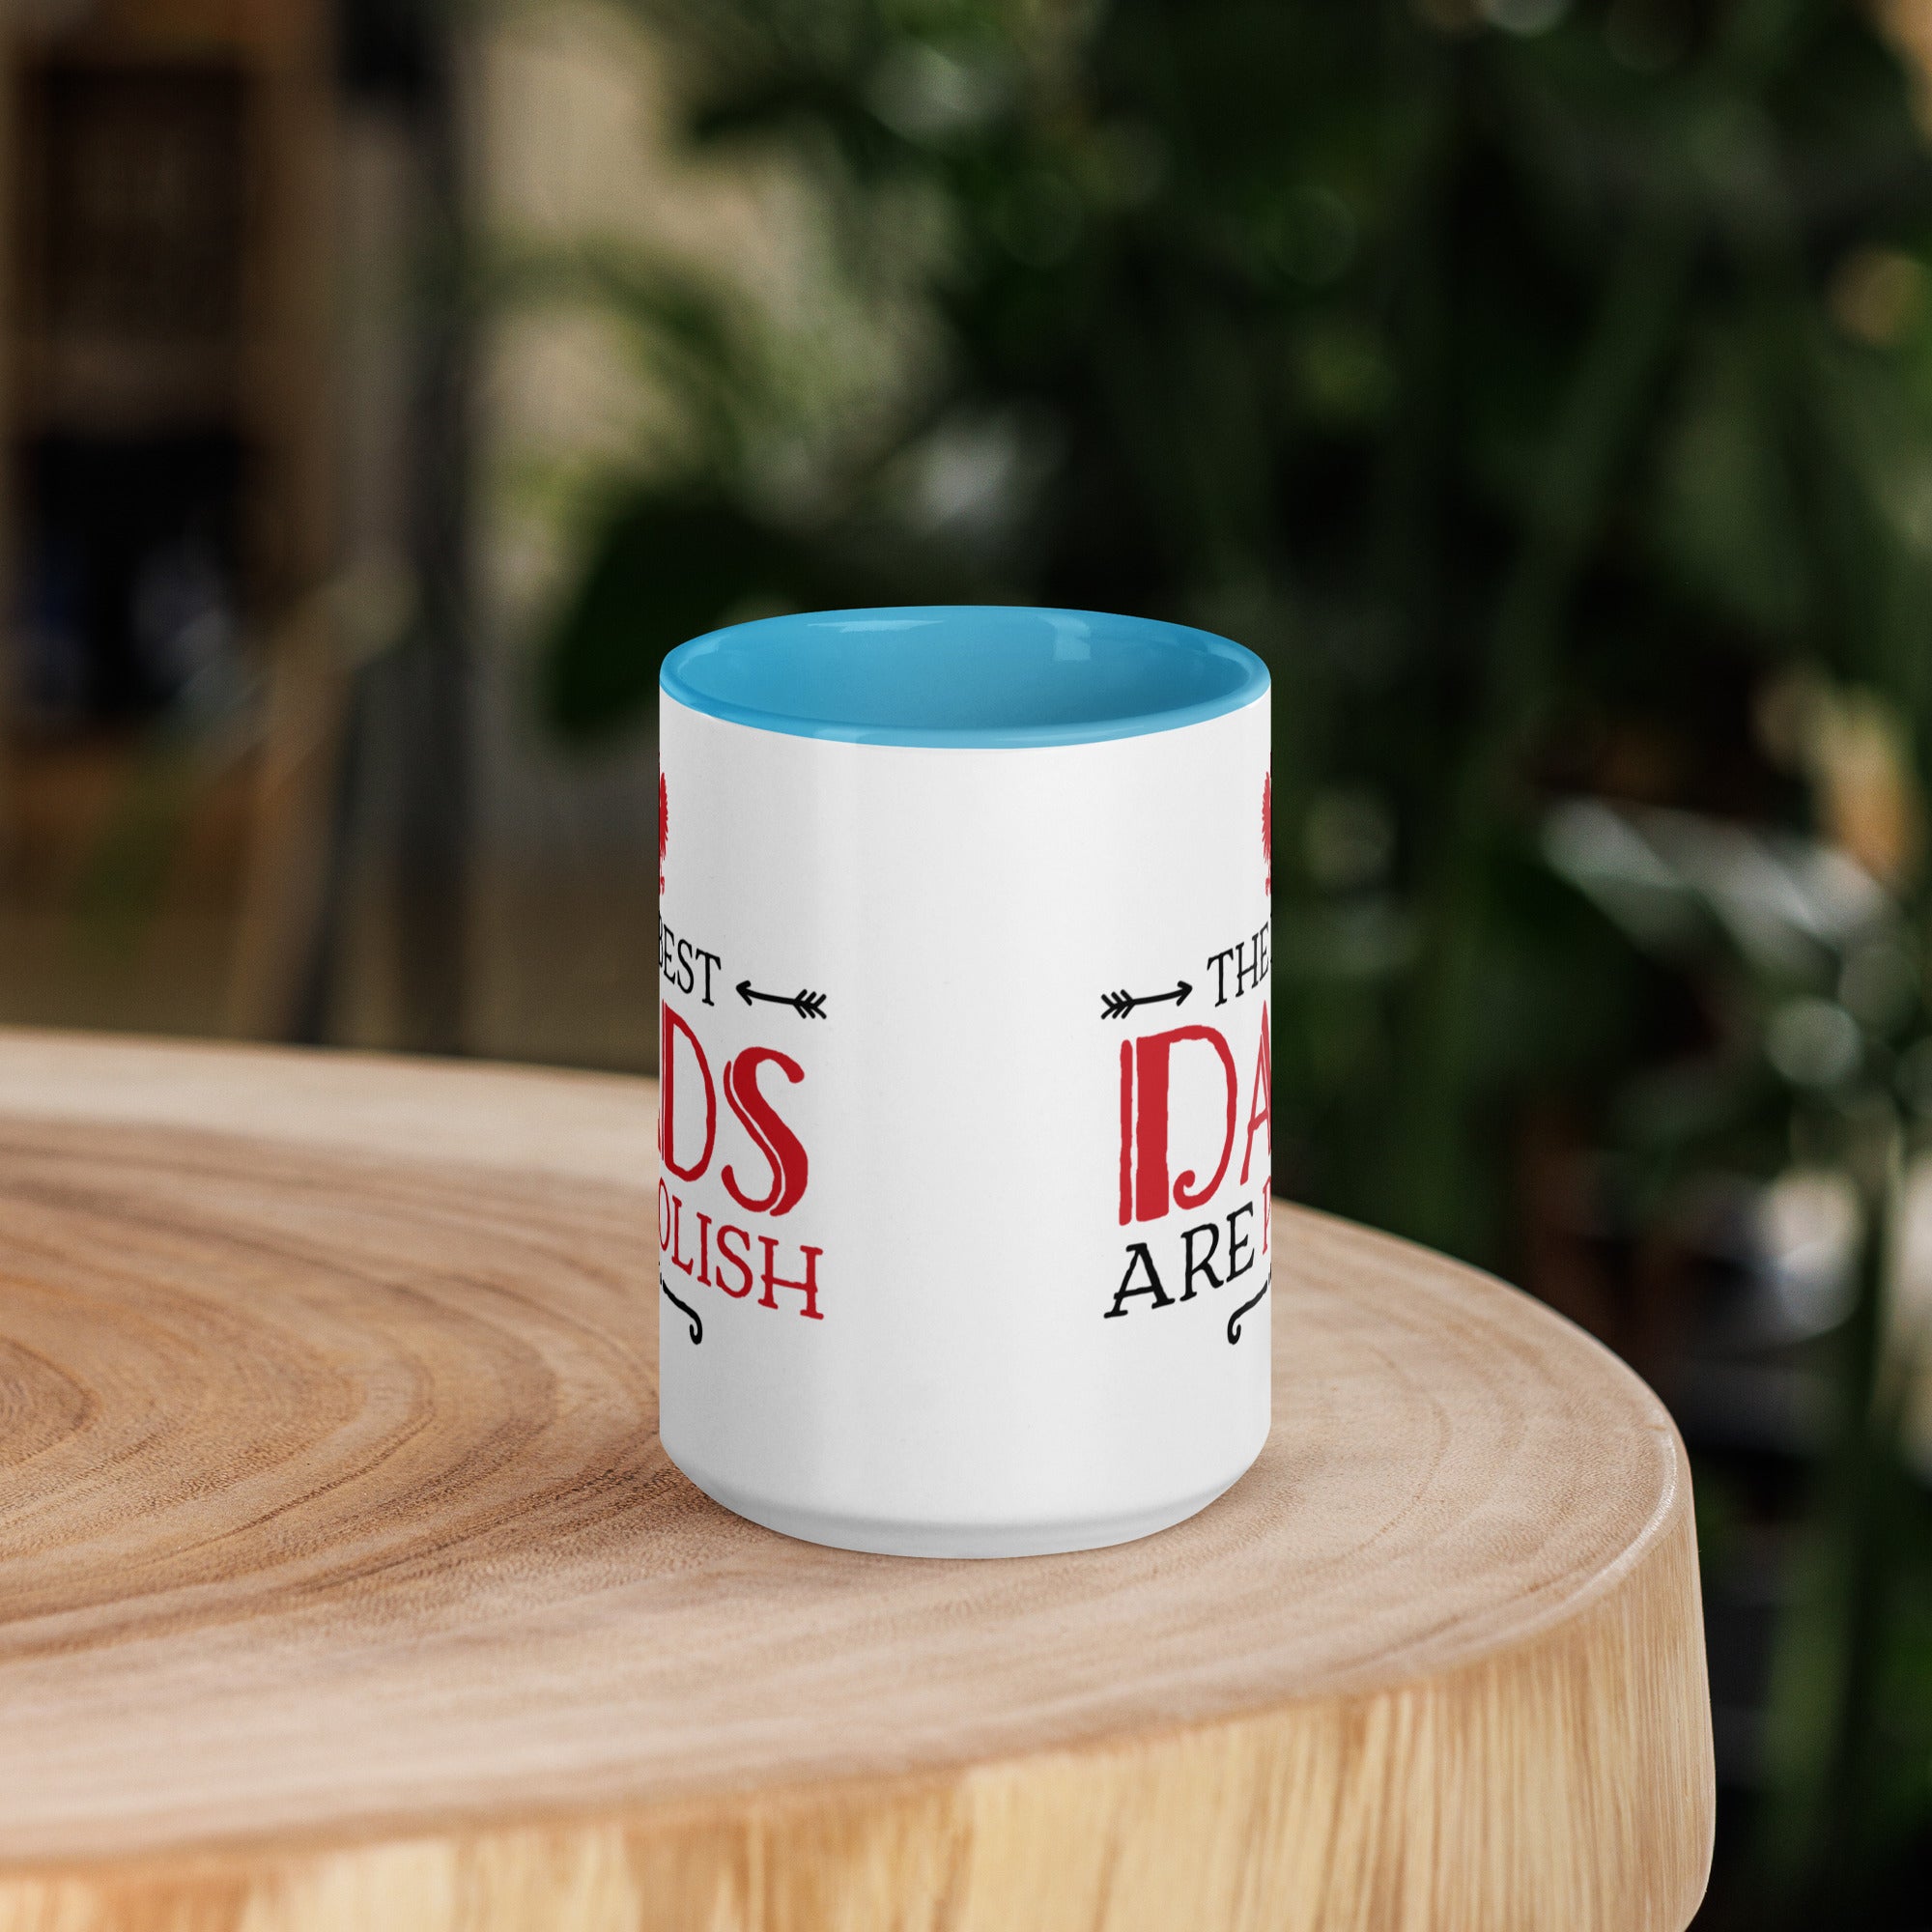 The Best Dads Are Polish 15 Oz Coffee Mug with Color Inside  Polish Shirt Store   